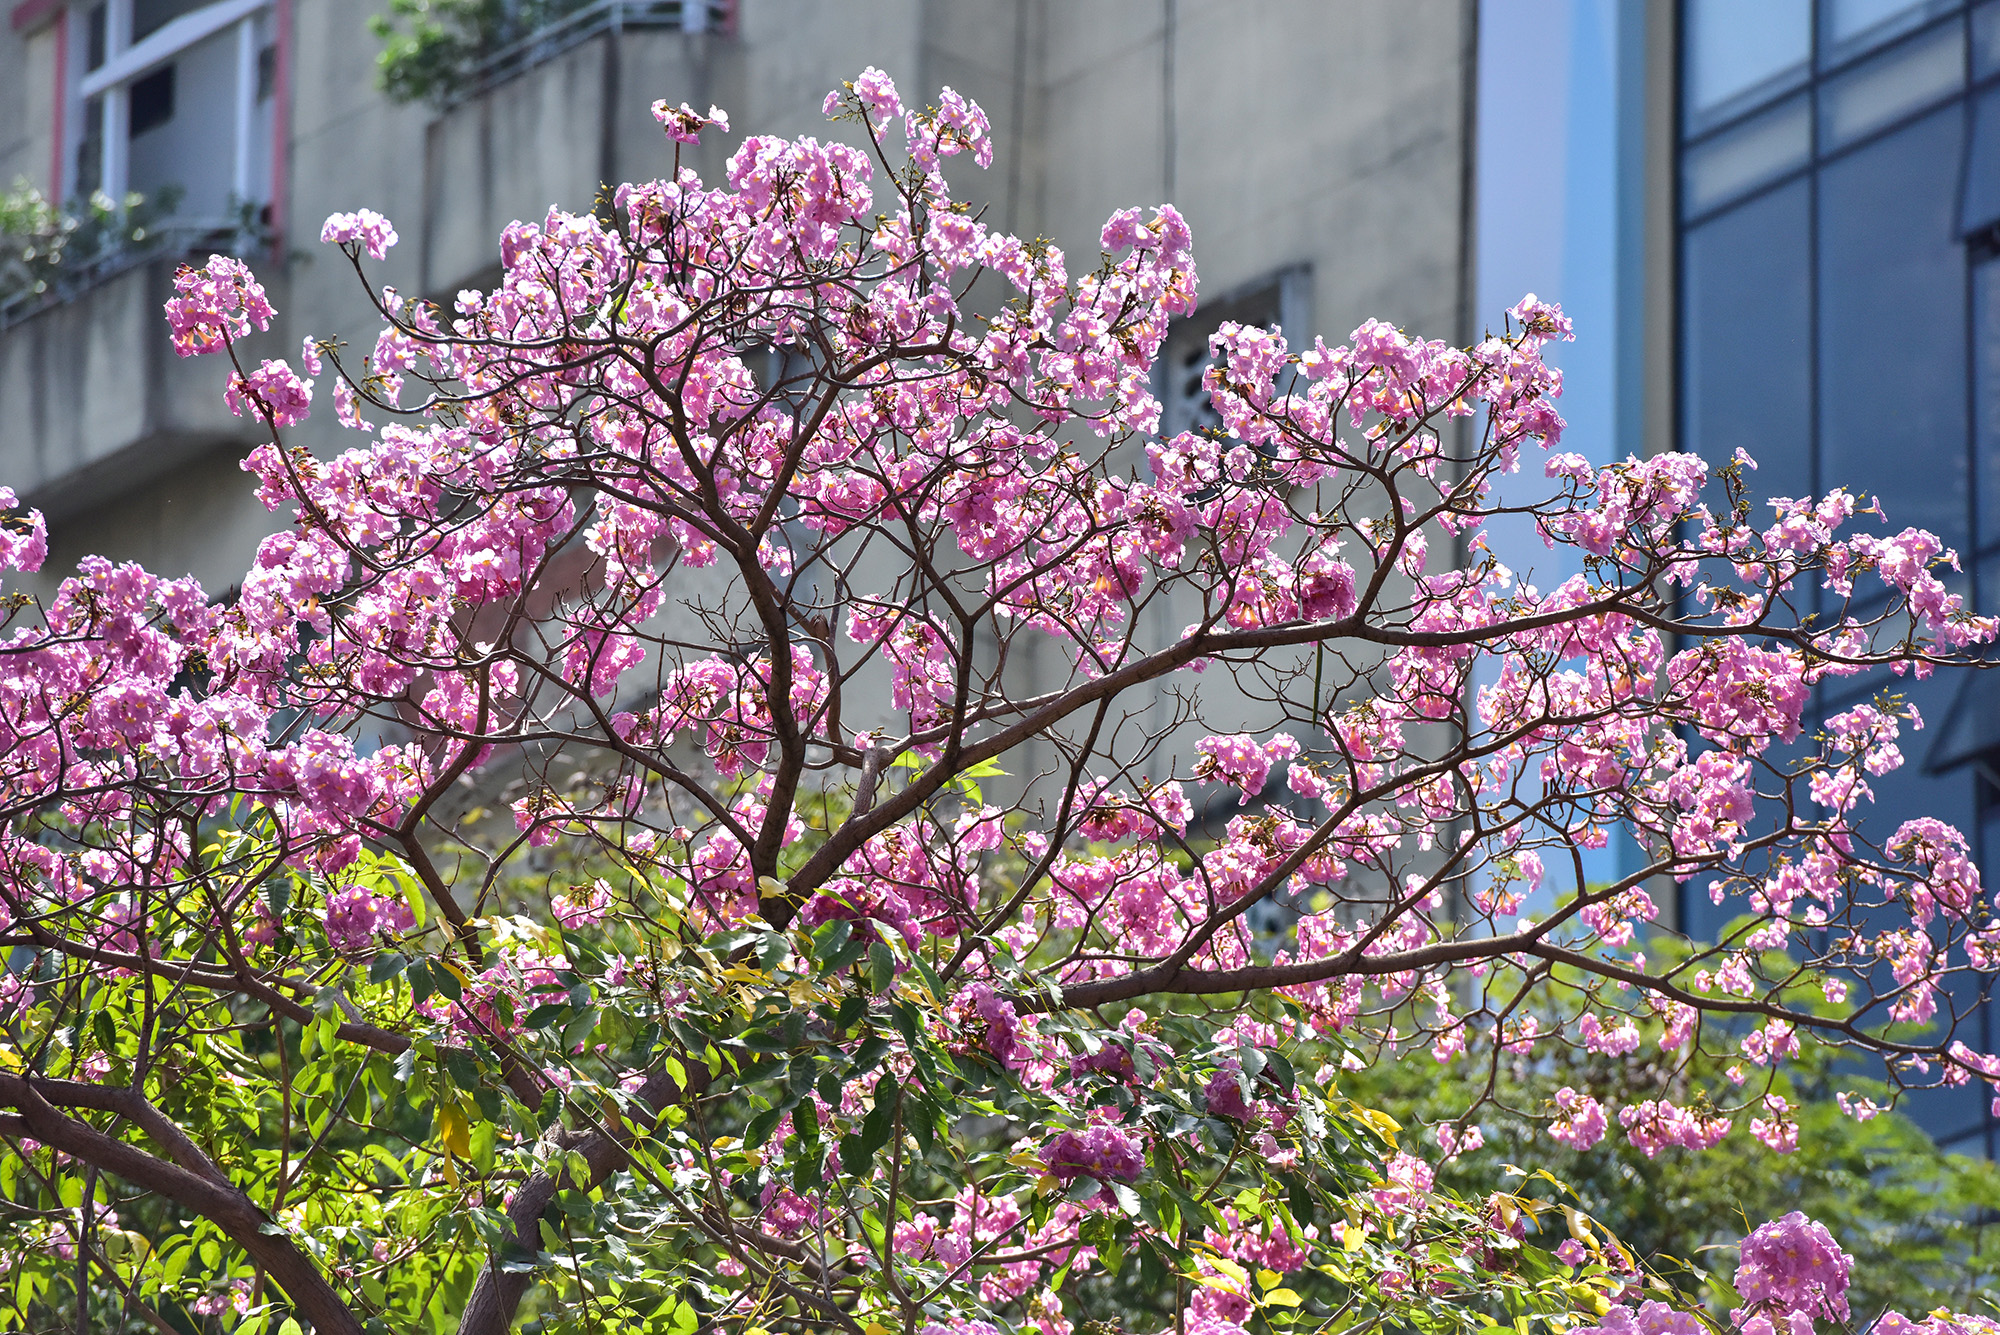 Be in awe of the picturesque sky of pink trumpets on the streets of Ho Chi Minh City - 8